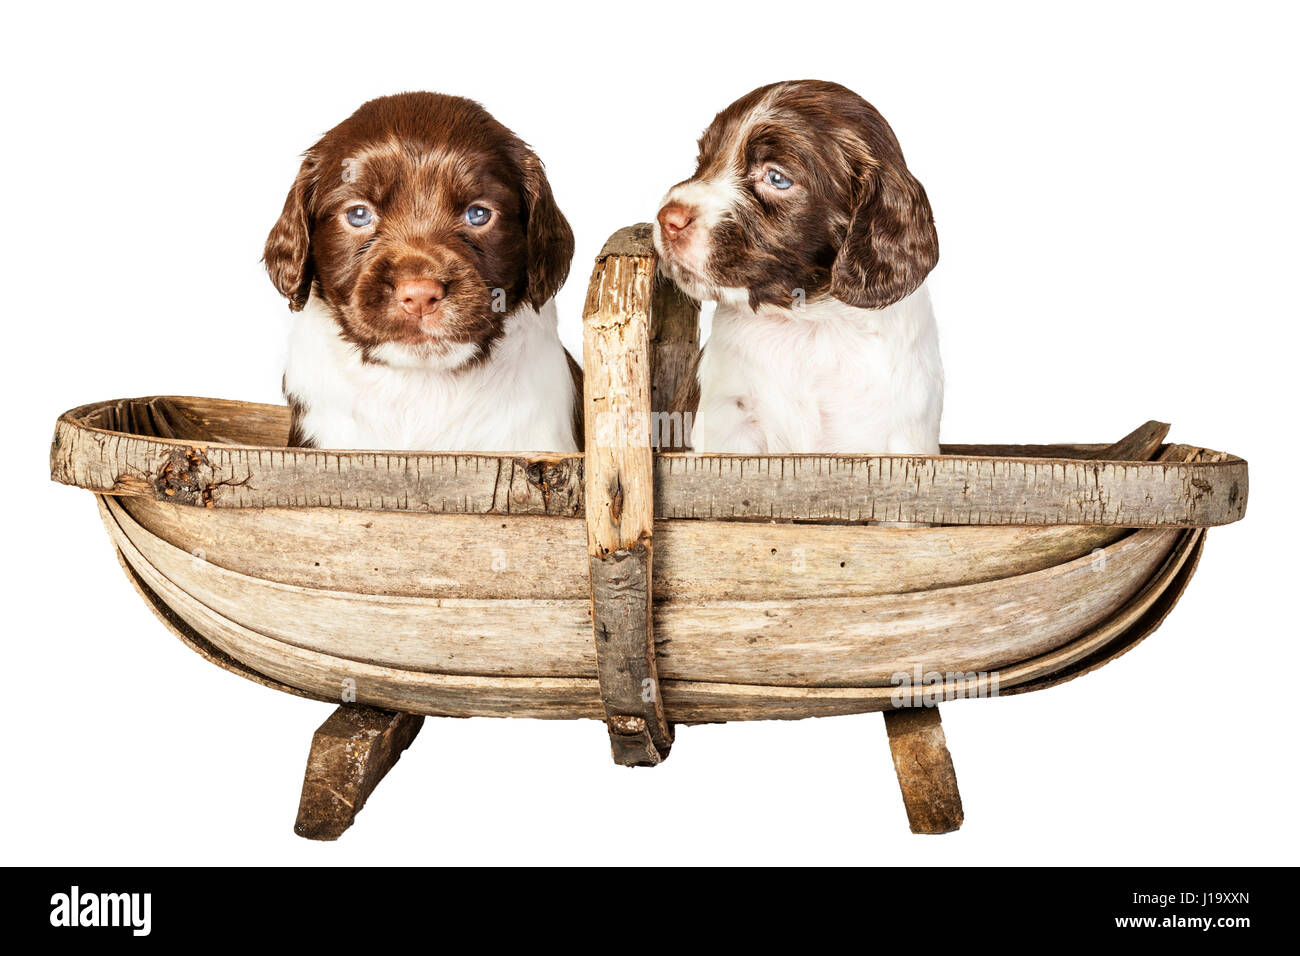 Two 4 week old liver and white English Springer Spaniel puppys in a trug Stock Photo